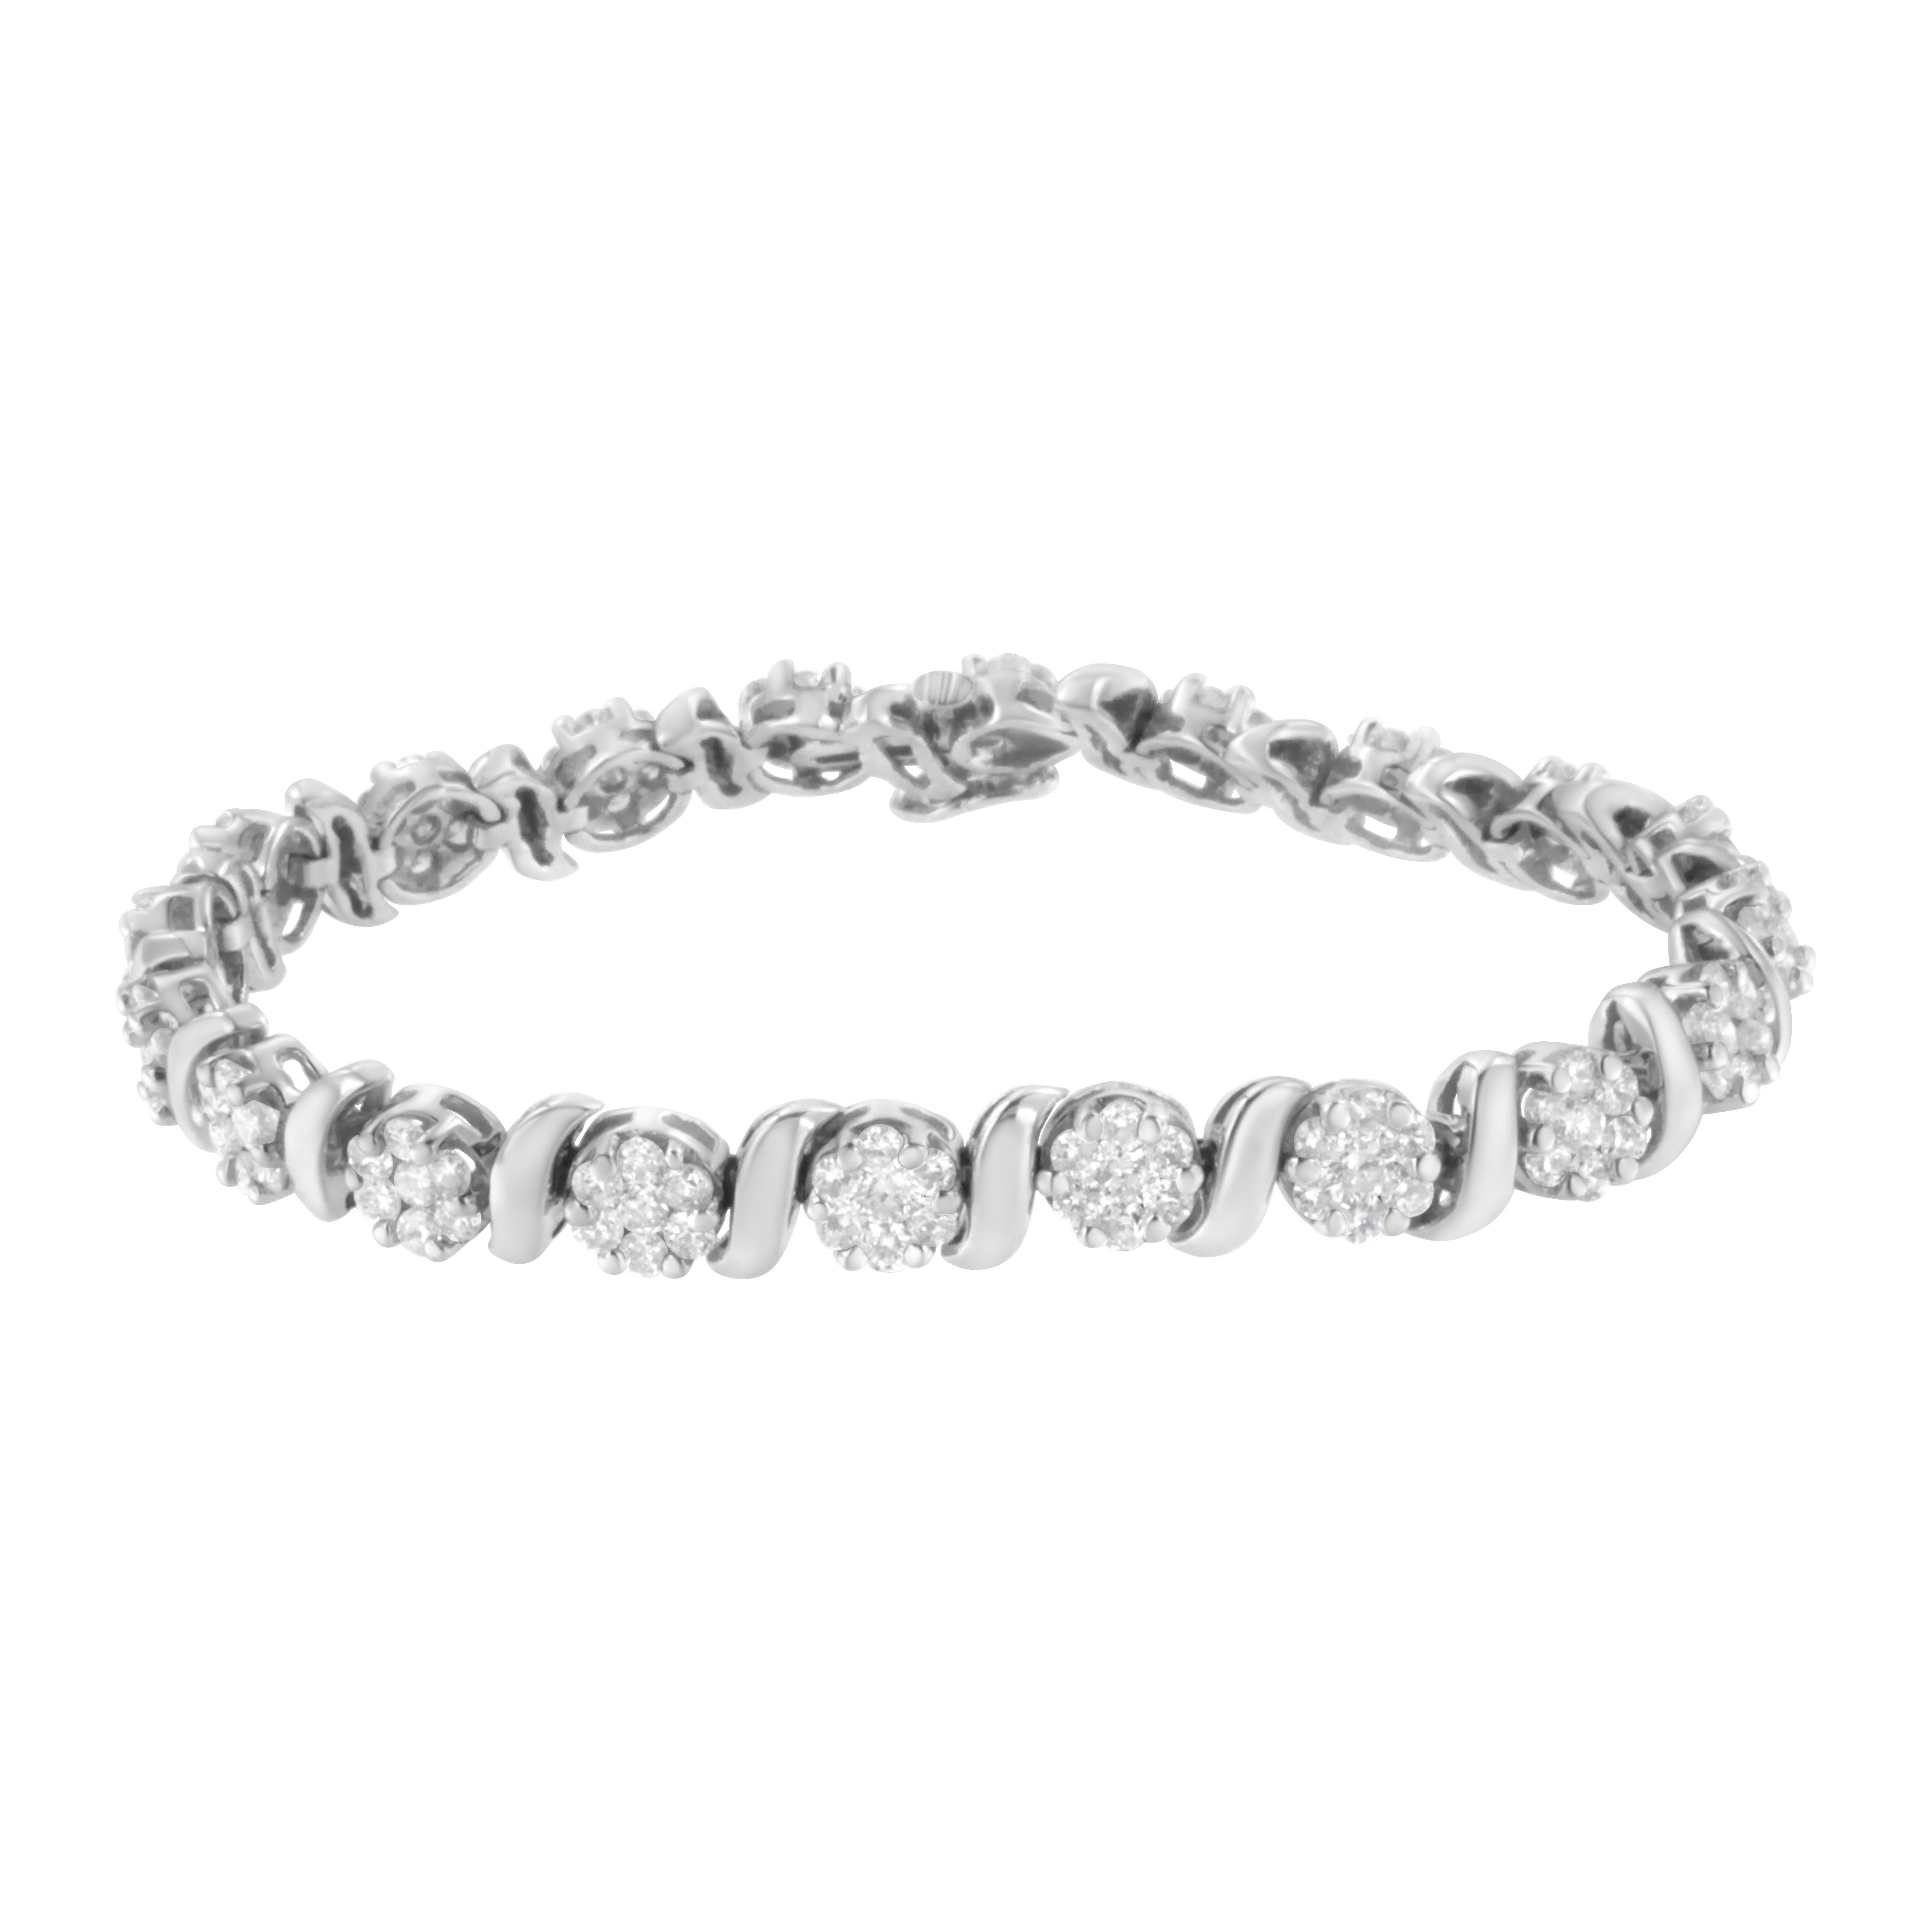 Add a little sparkle to your outfit with this 14k white gold link bracelet. Soft white gold ribbons curve and create S shaped links that sit in between circular round cut diamond clusters. 5 1/4ct TDW of glimmering diamonds are displayed on this